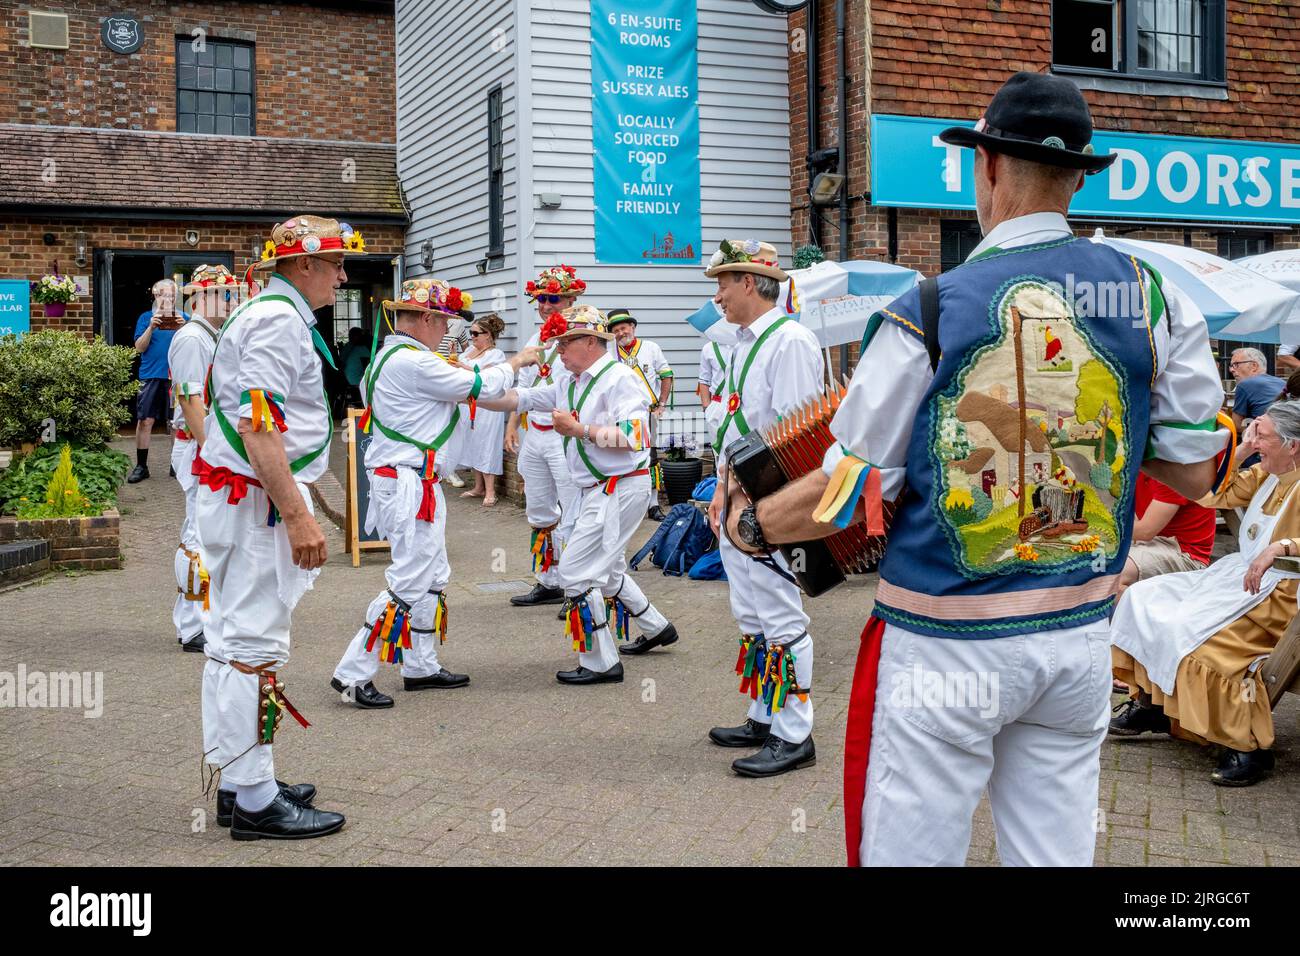 A Group Of Morris Dancers Perform Outside The Dorset Pub, Lewes, East Sussex, UK. Stock Photo